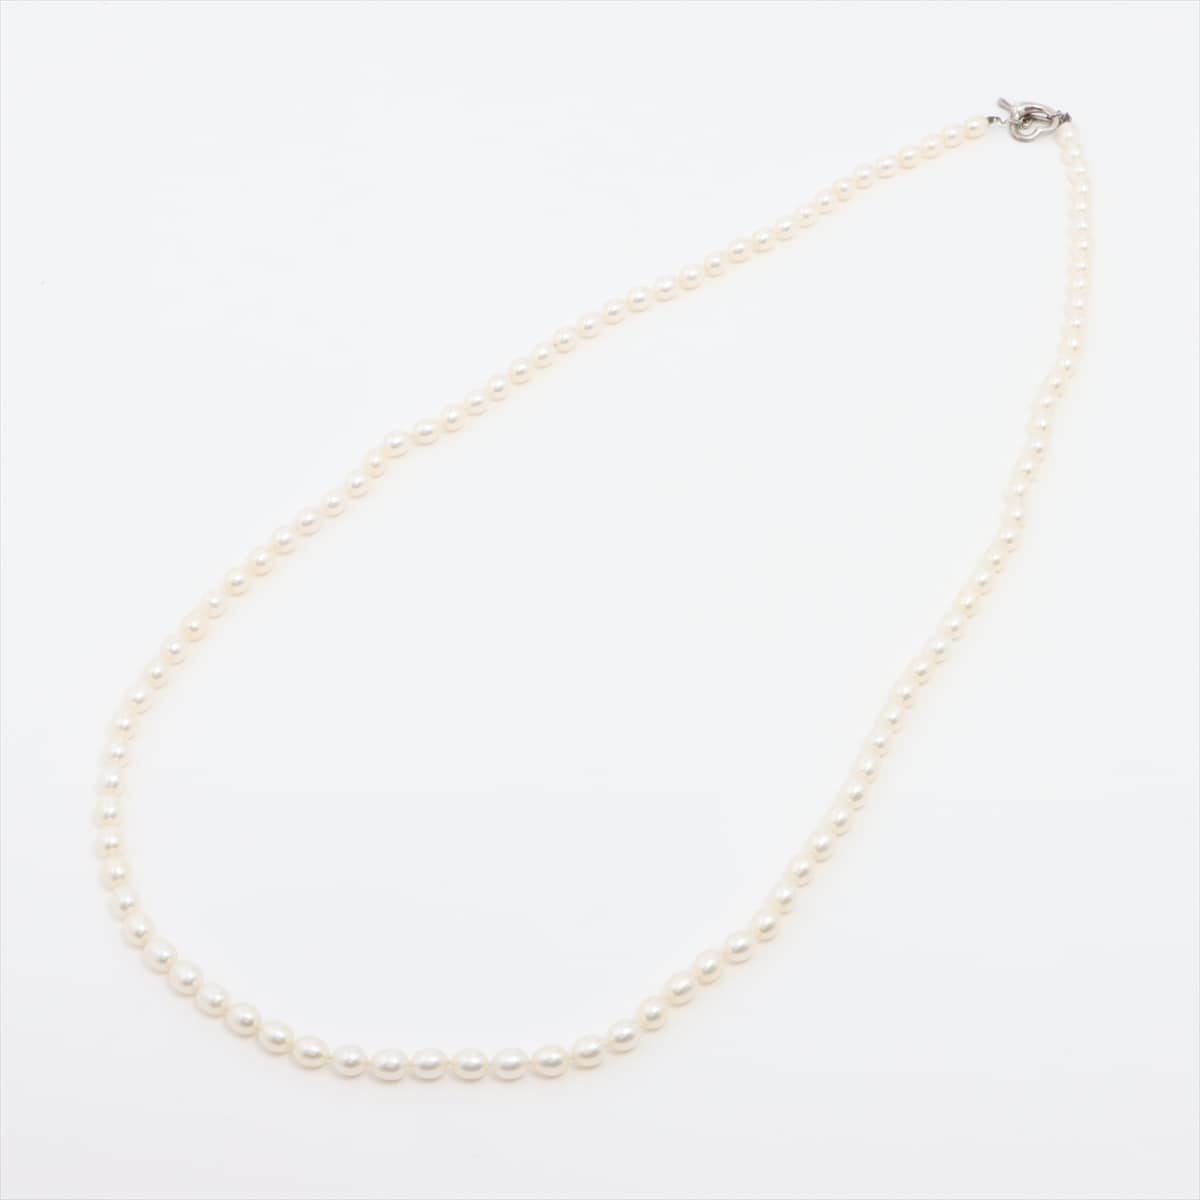 Tiffany Open Heart Necklace 925 x pearl 55.6g White